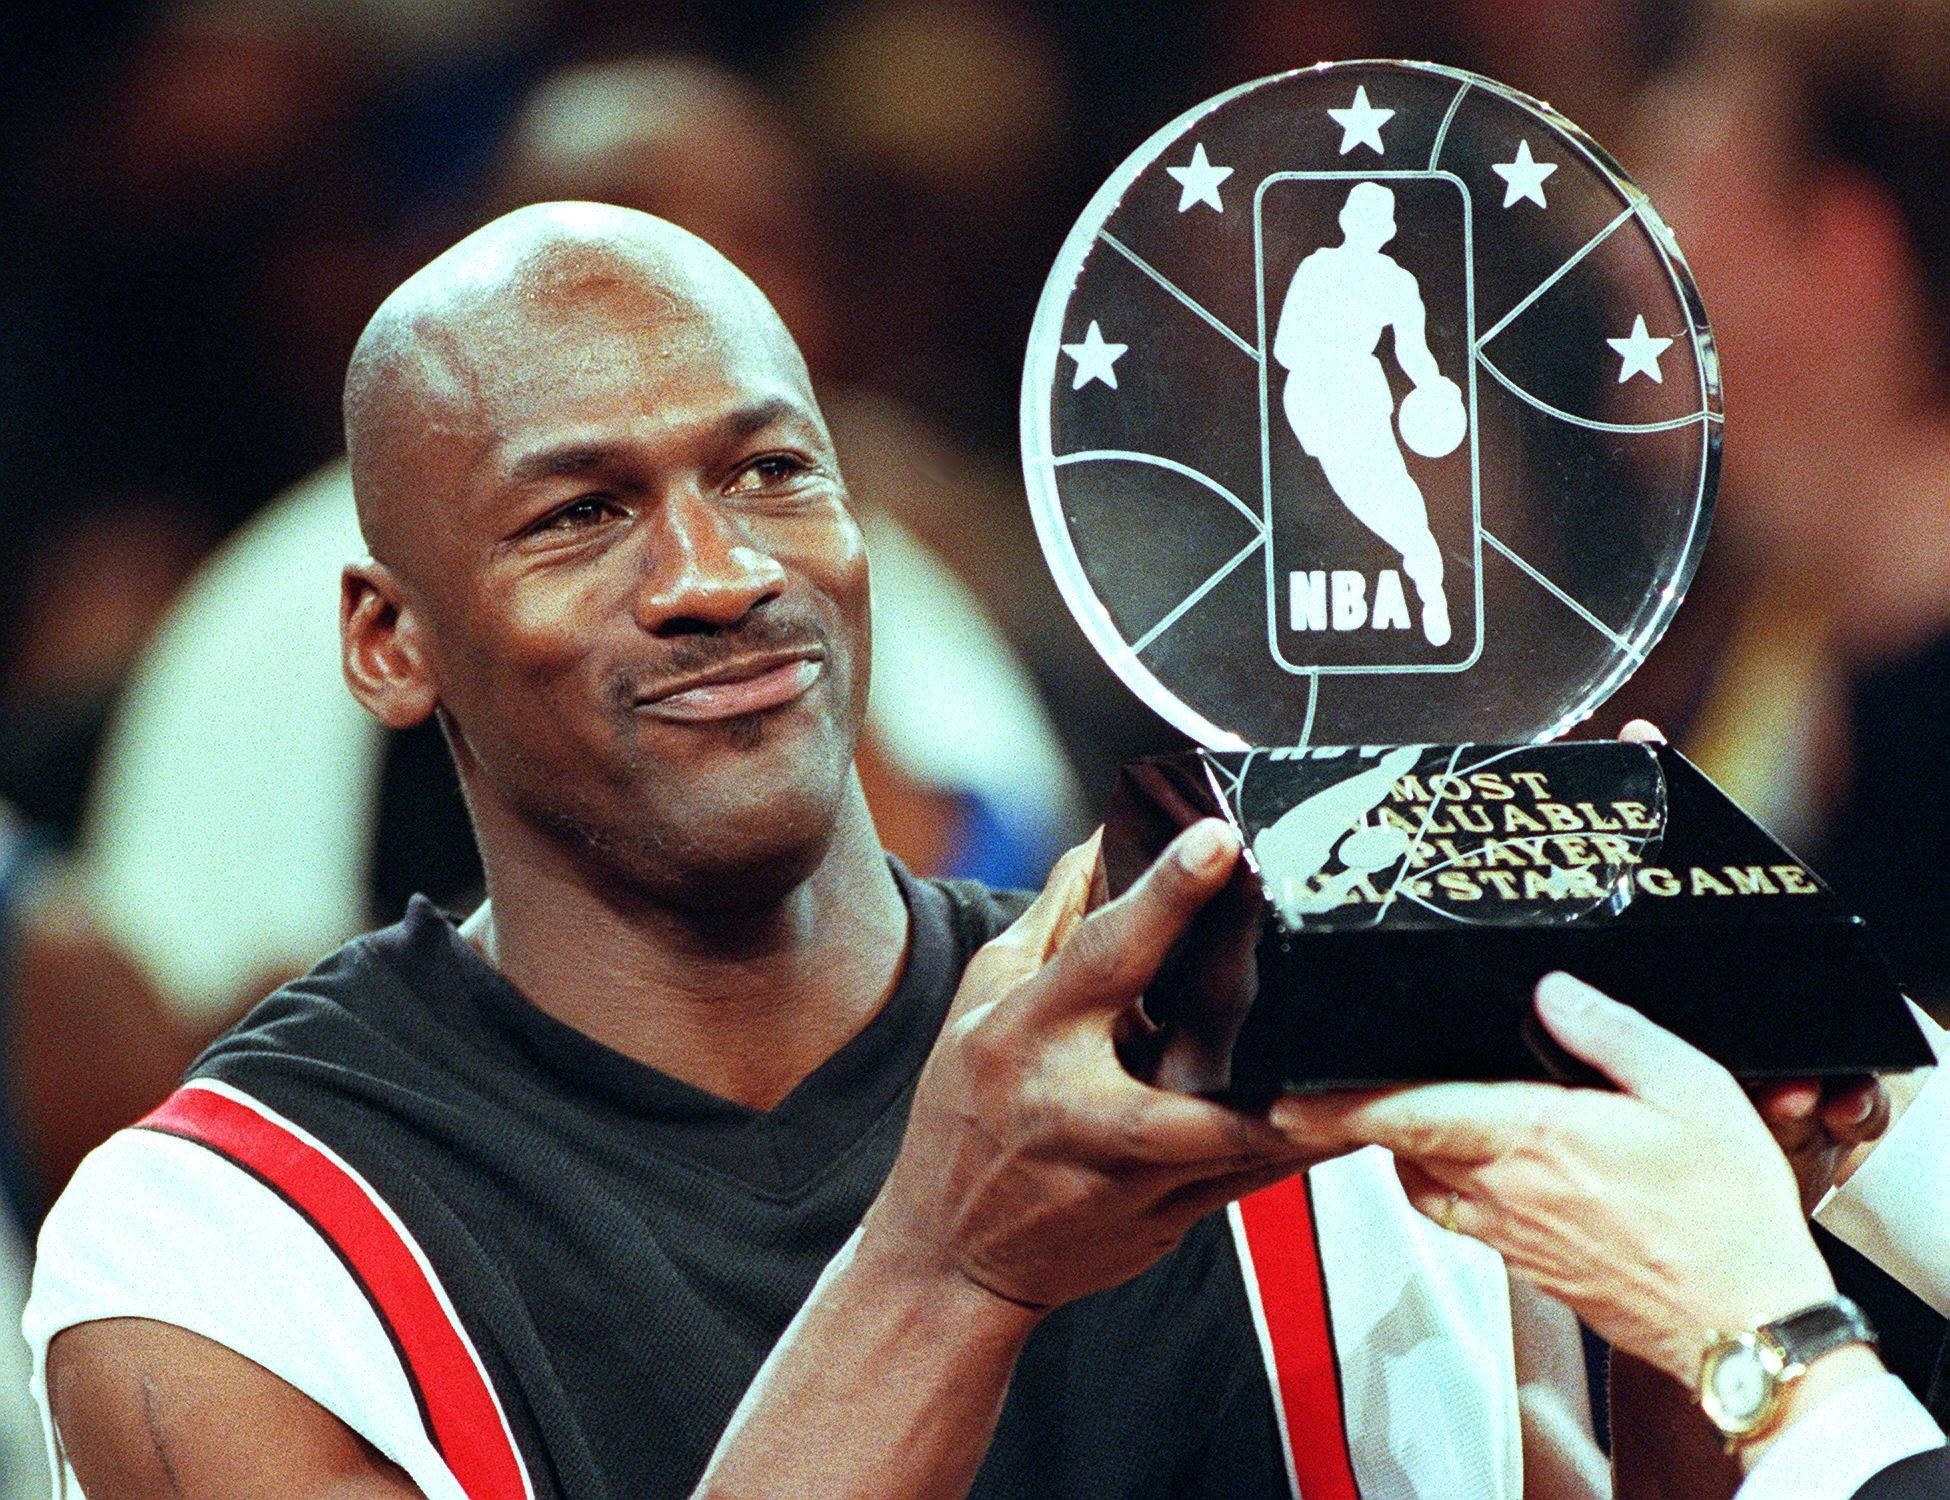 Jordan holding up the MVP award at the NBA All-Star Game in 1998